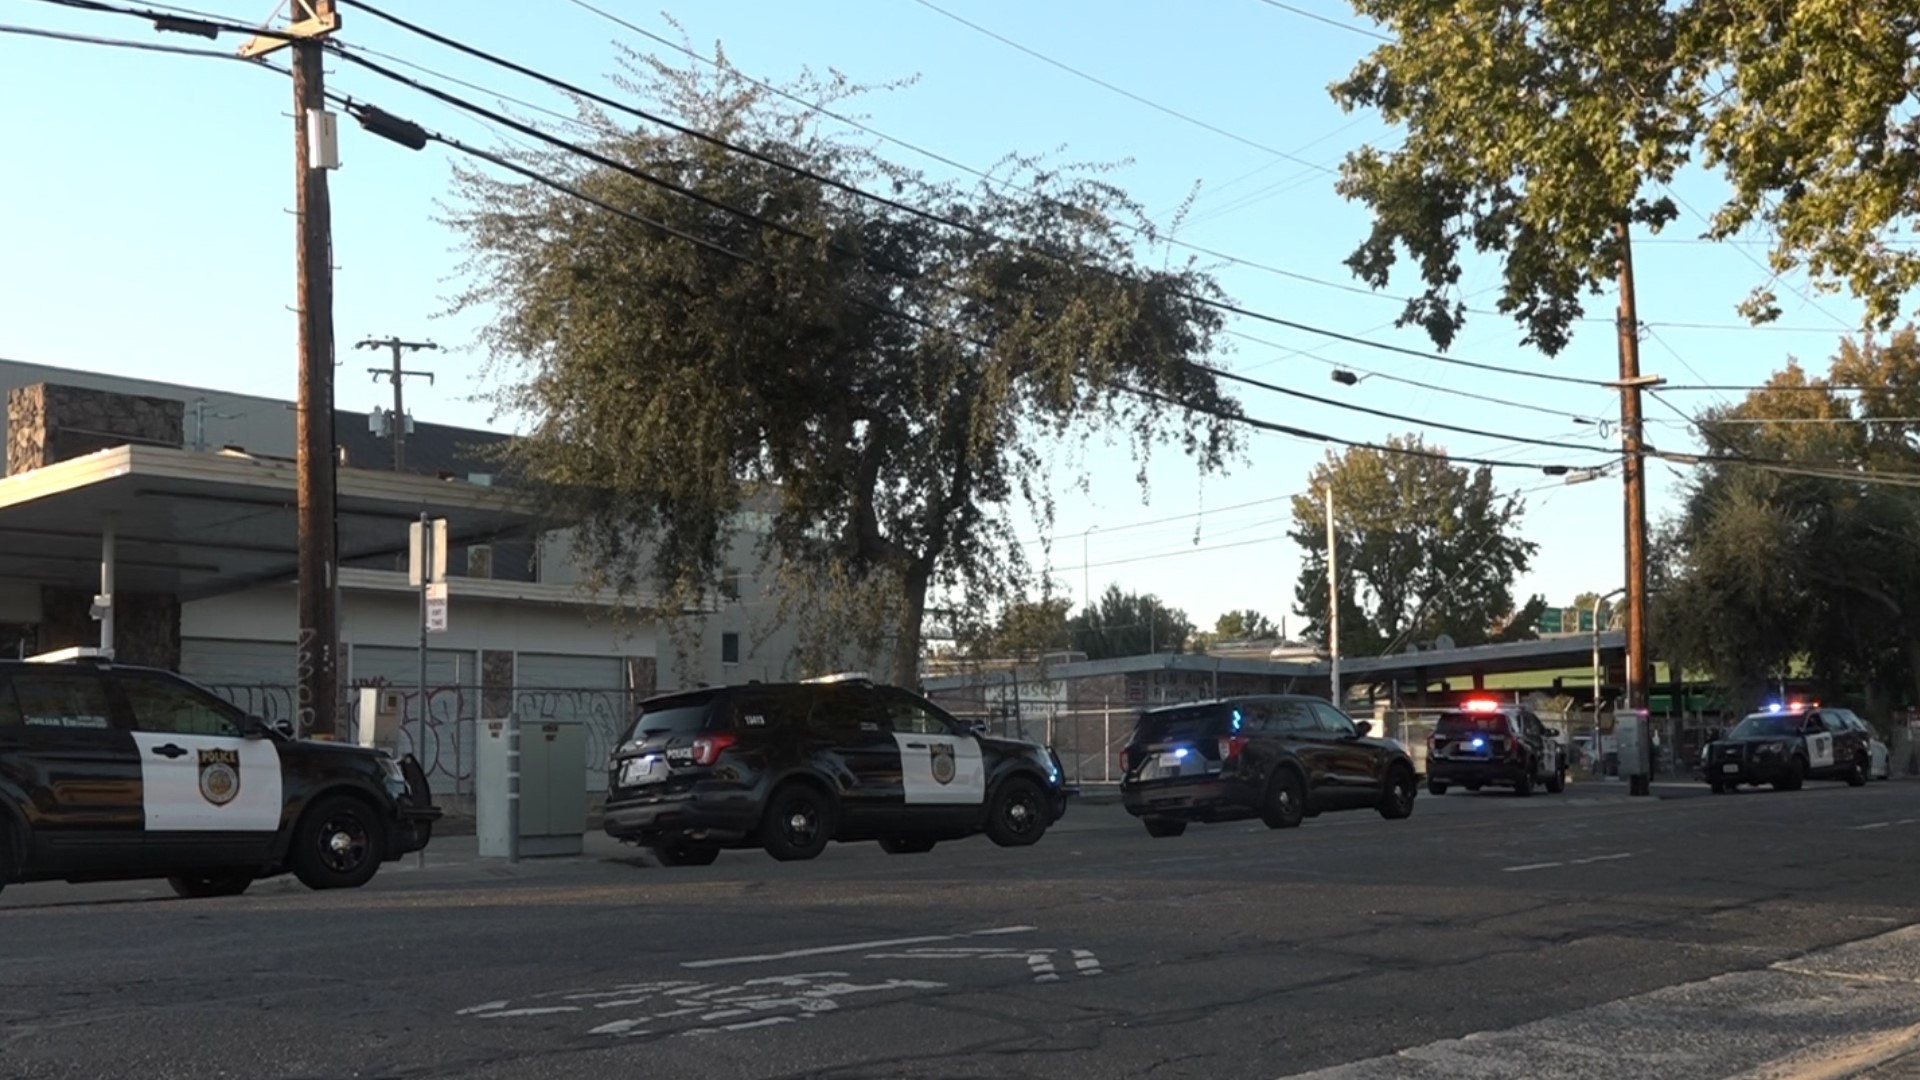 Sacramento police reported to the 400 block of Broadway just after 5 p.m. on reports of a stabbing. One man is dead and another was taken to the hospital.